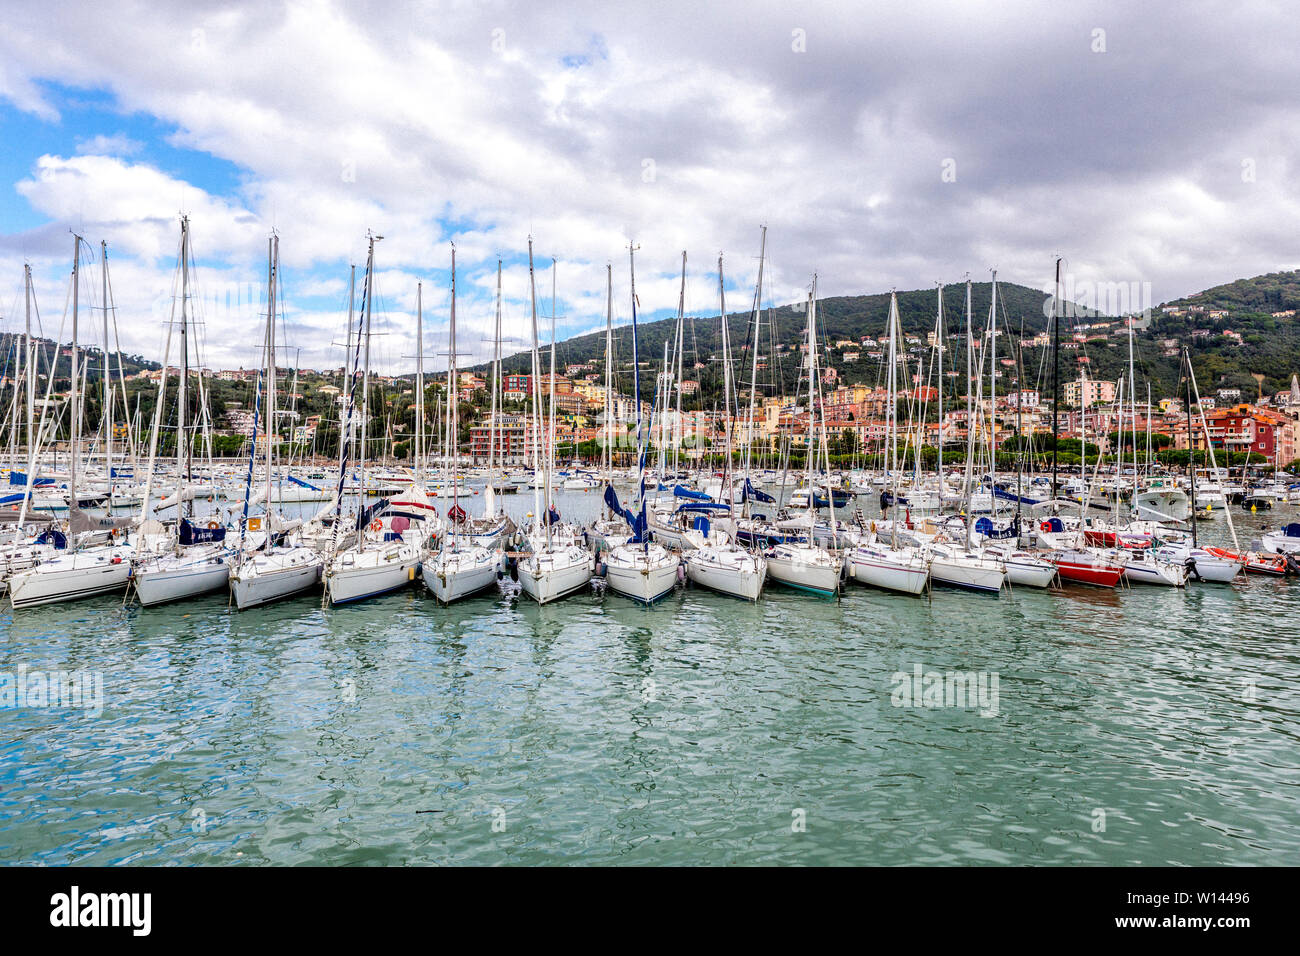 Sailboats neatly in a row in the harbour and houses on the hills, against cloudy sky in Lerici in Liguria, Italy Stock Photo